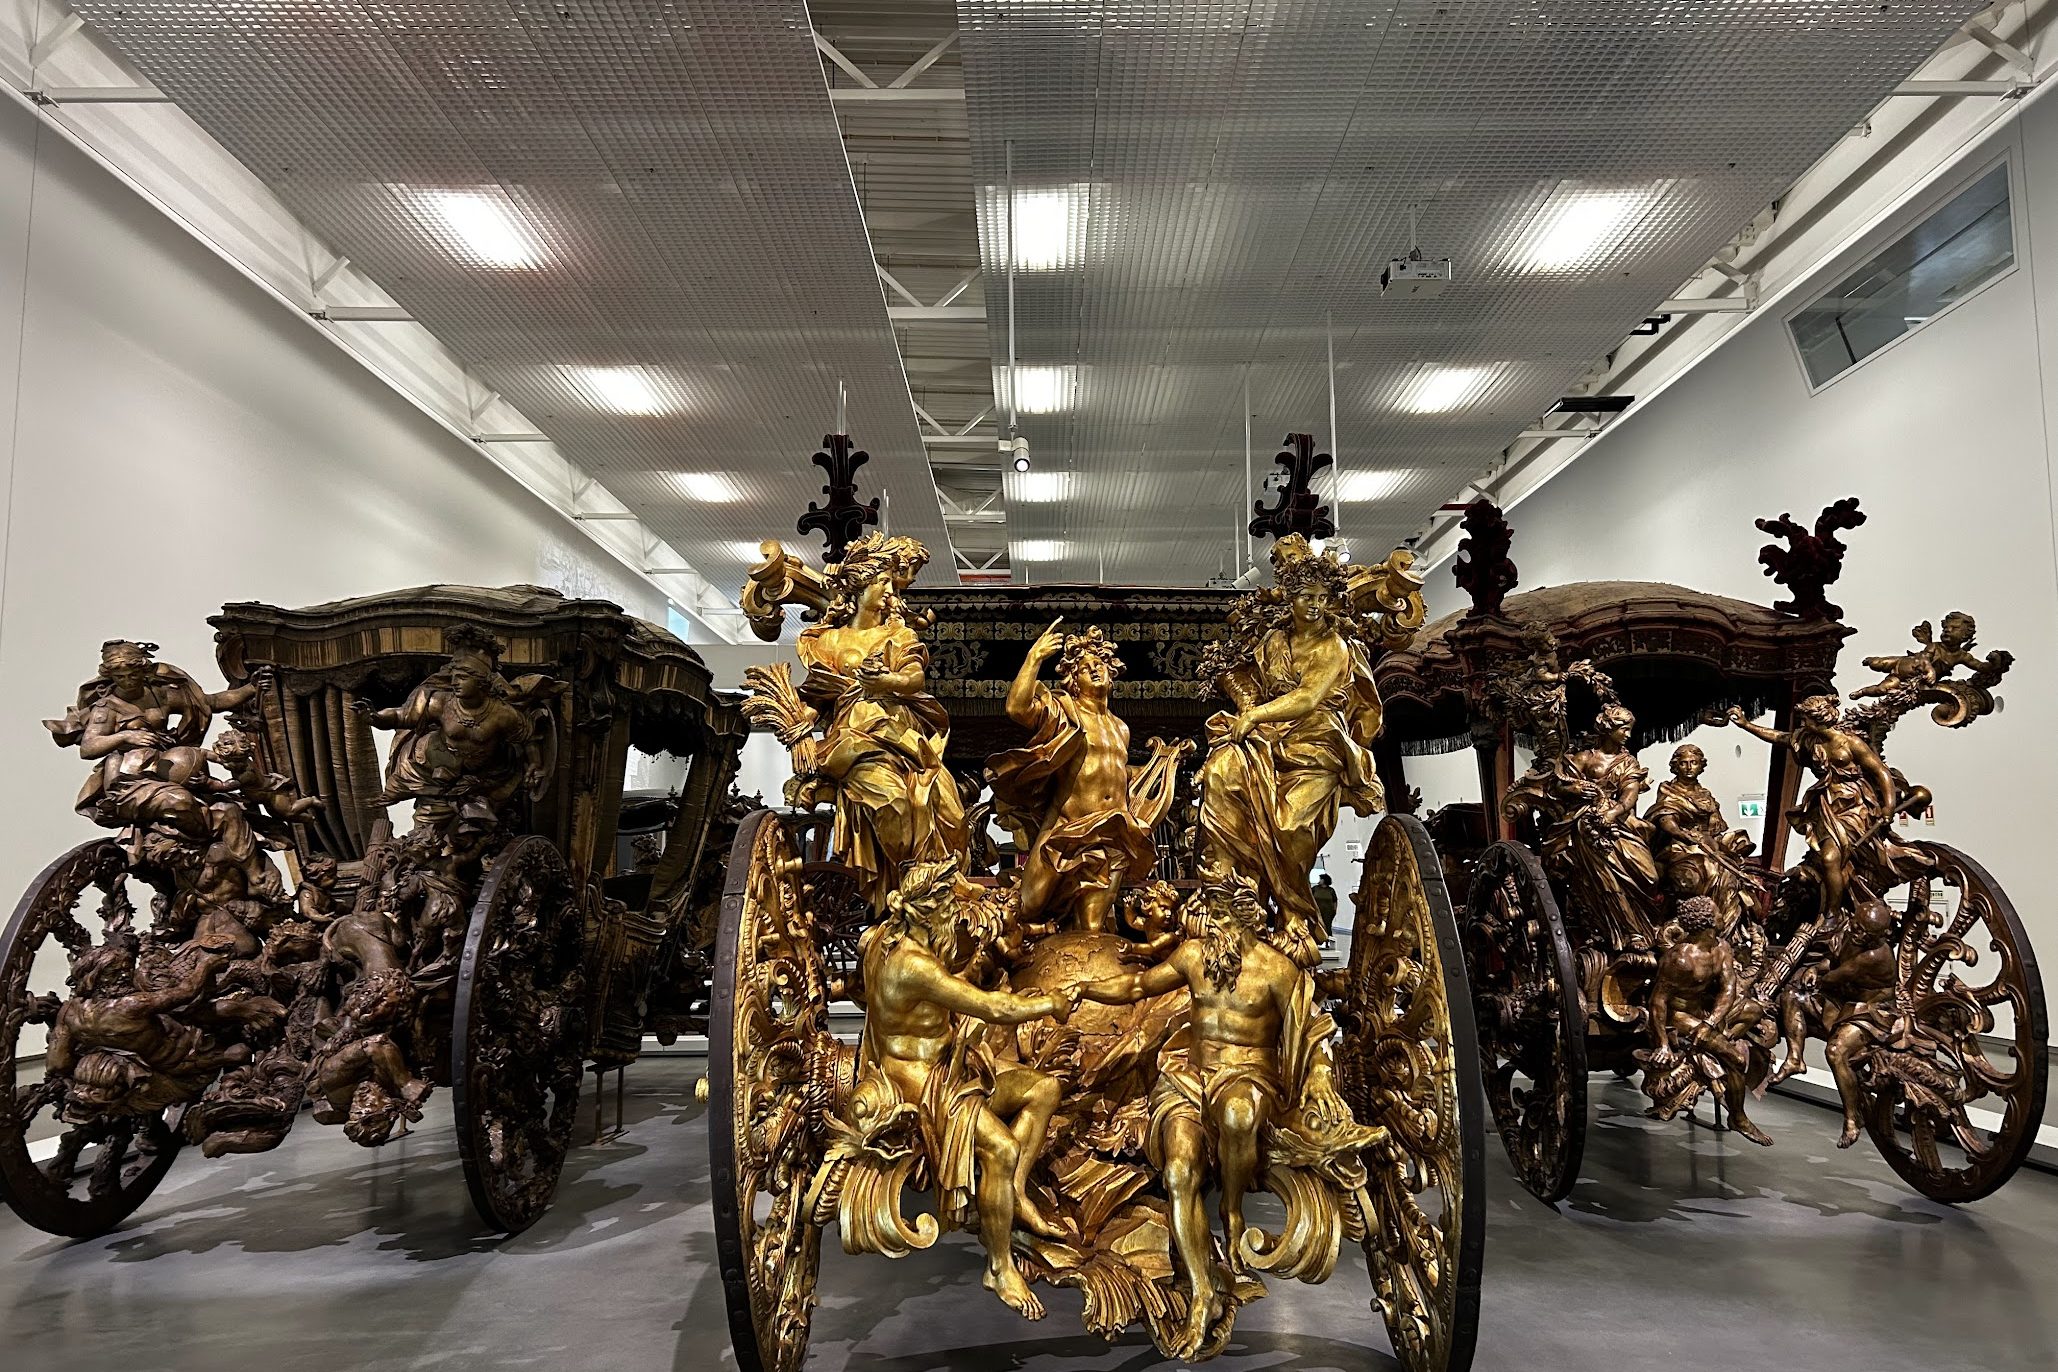 Golden carriages in a museum